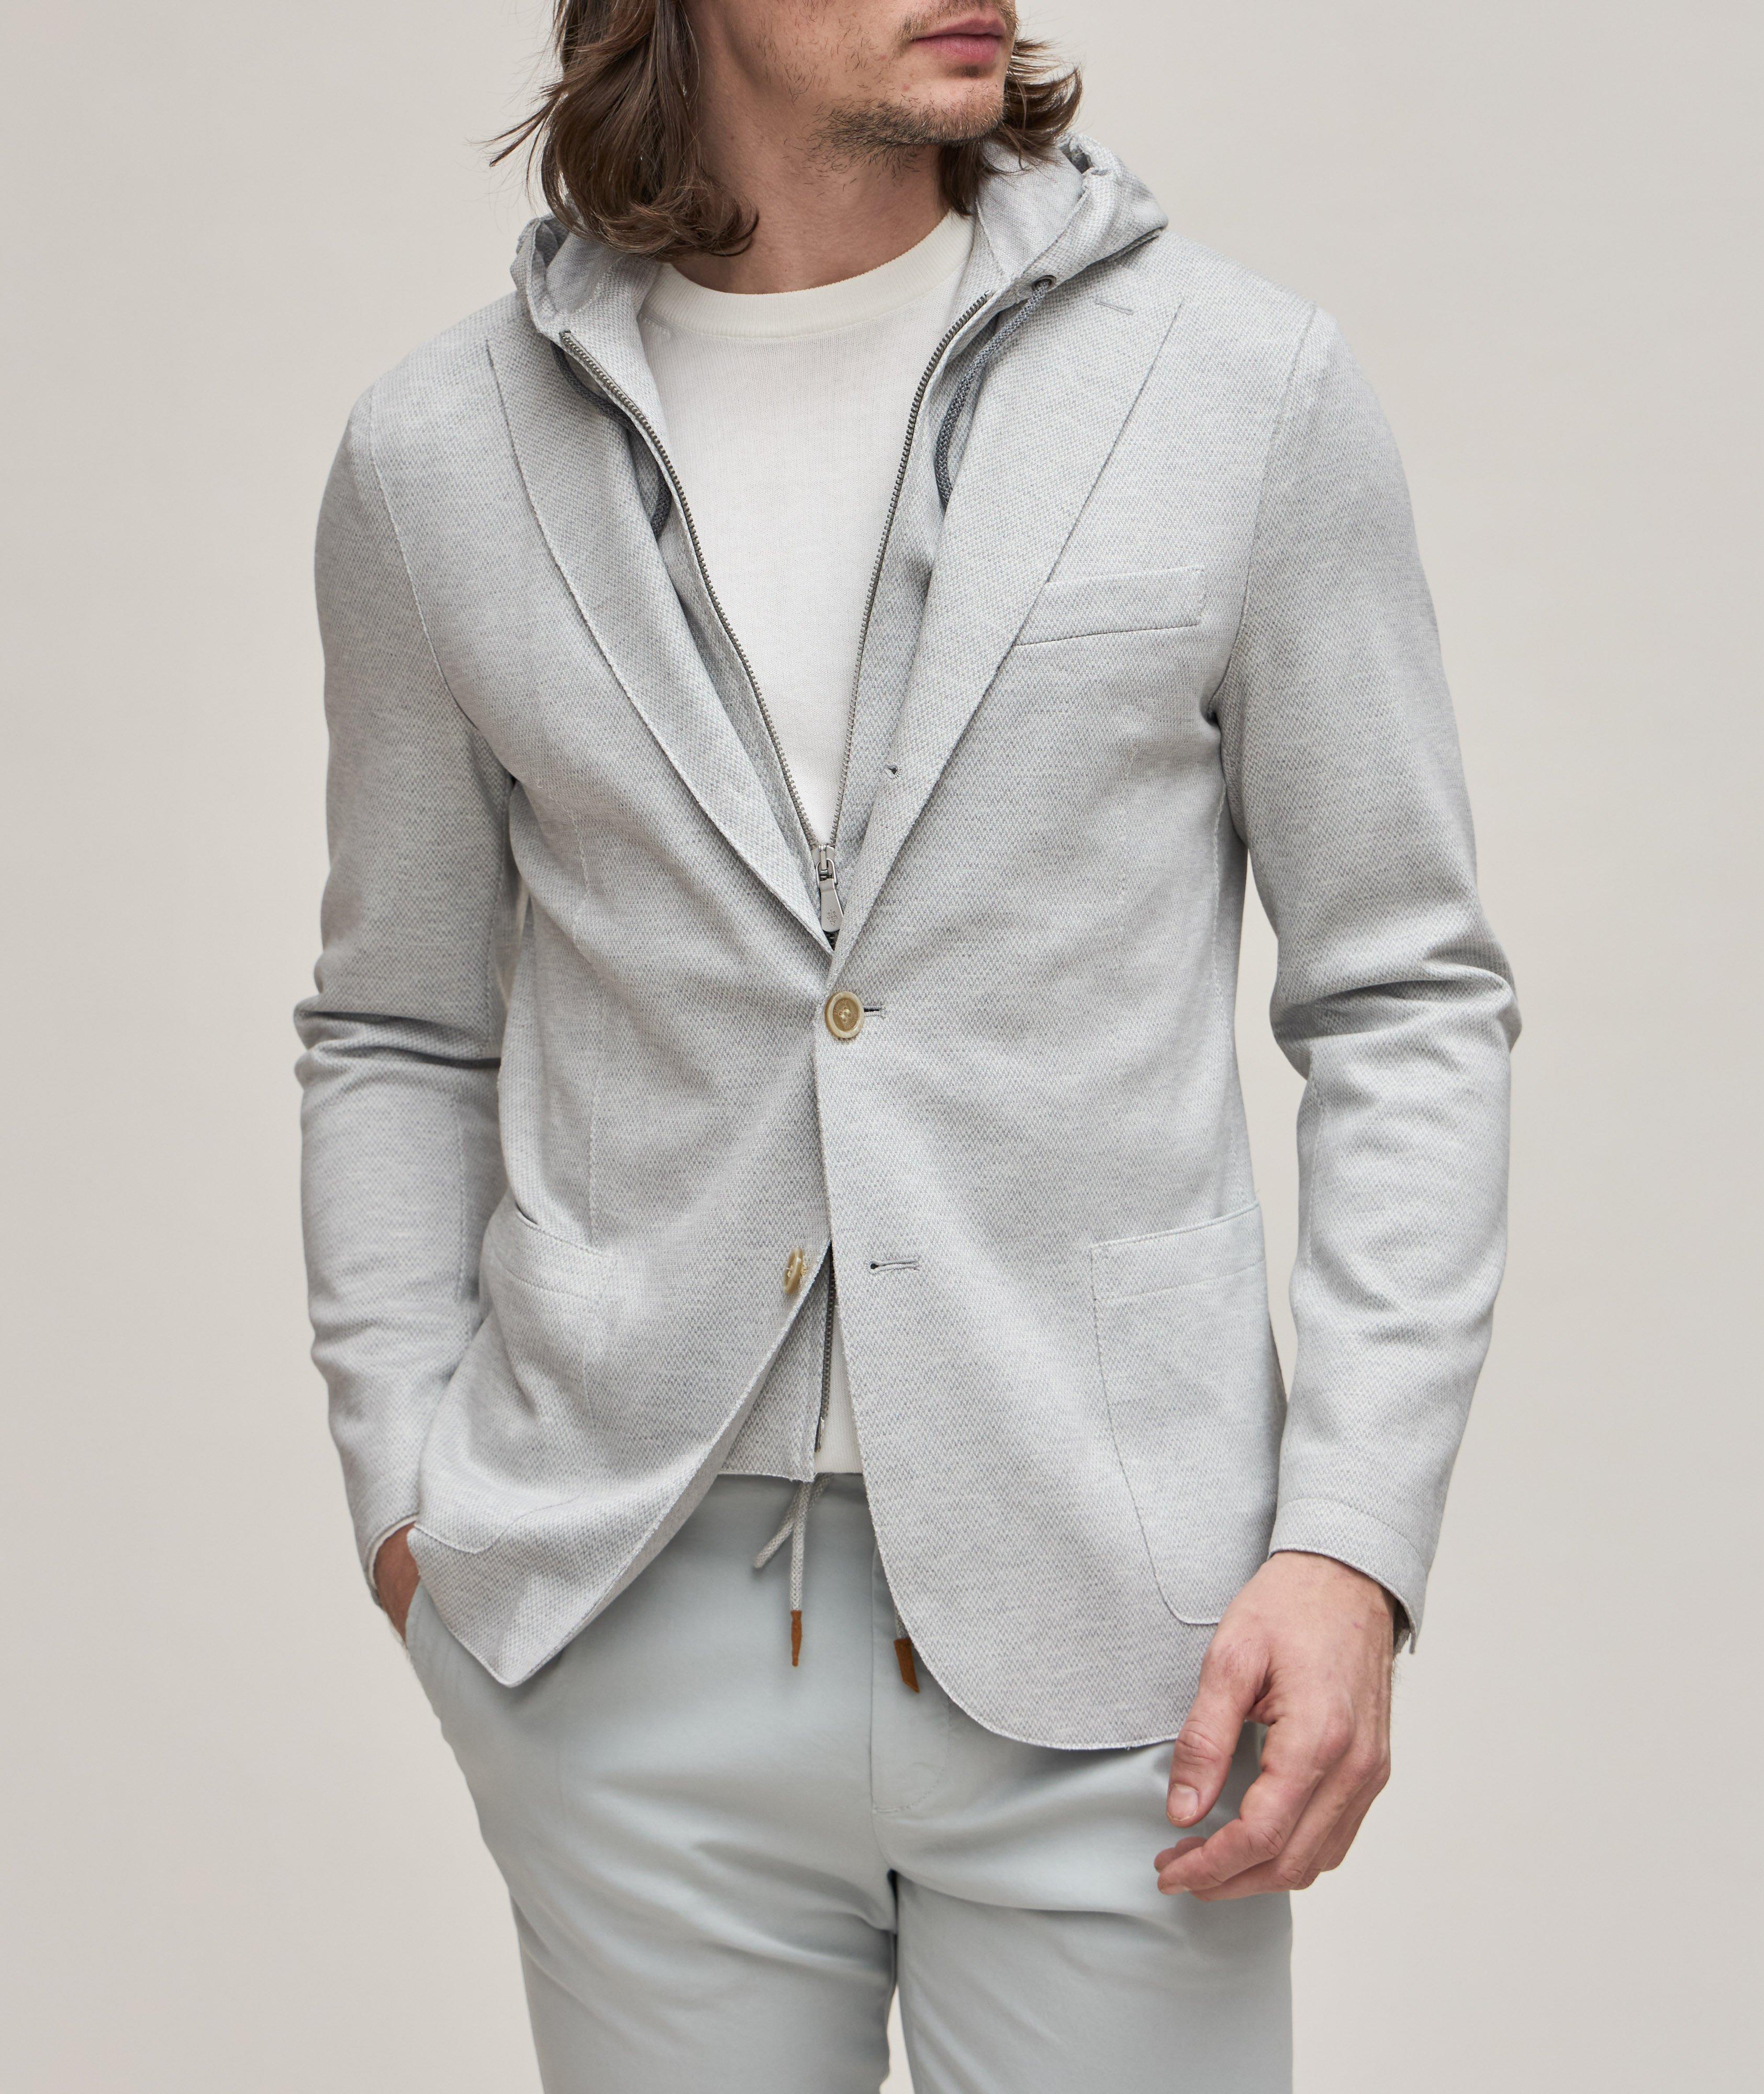 Removable Insert Technical Fabric Sport Jacket